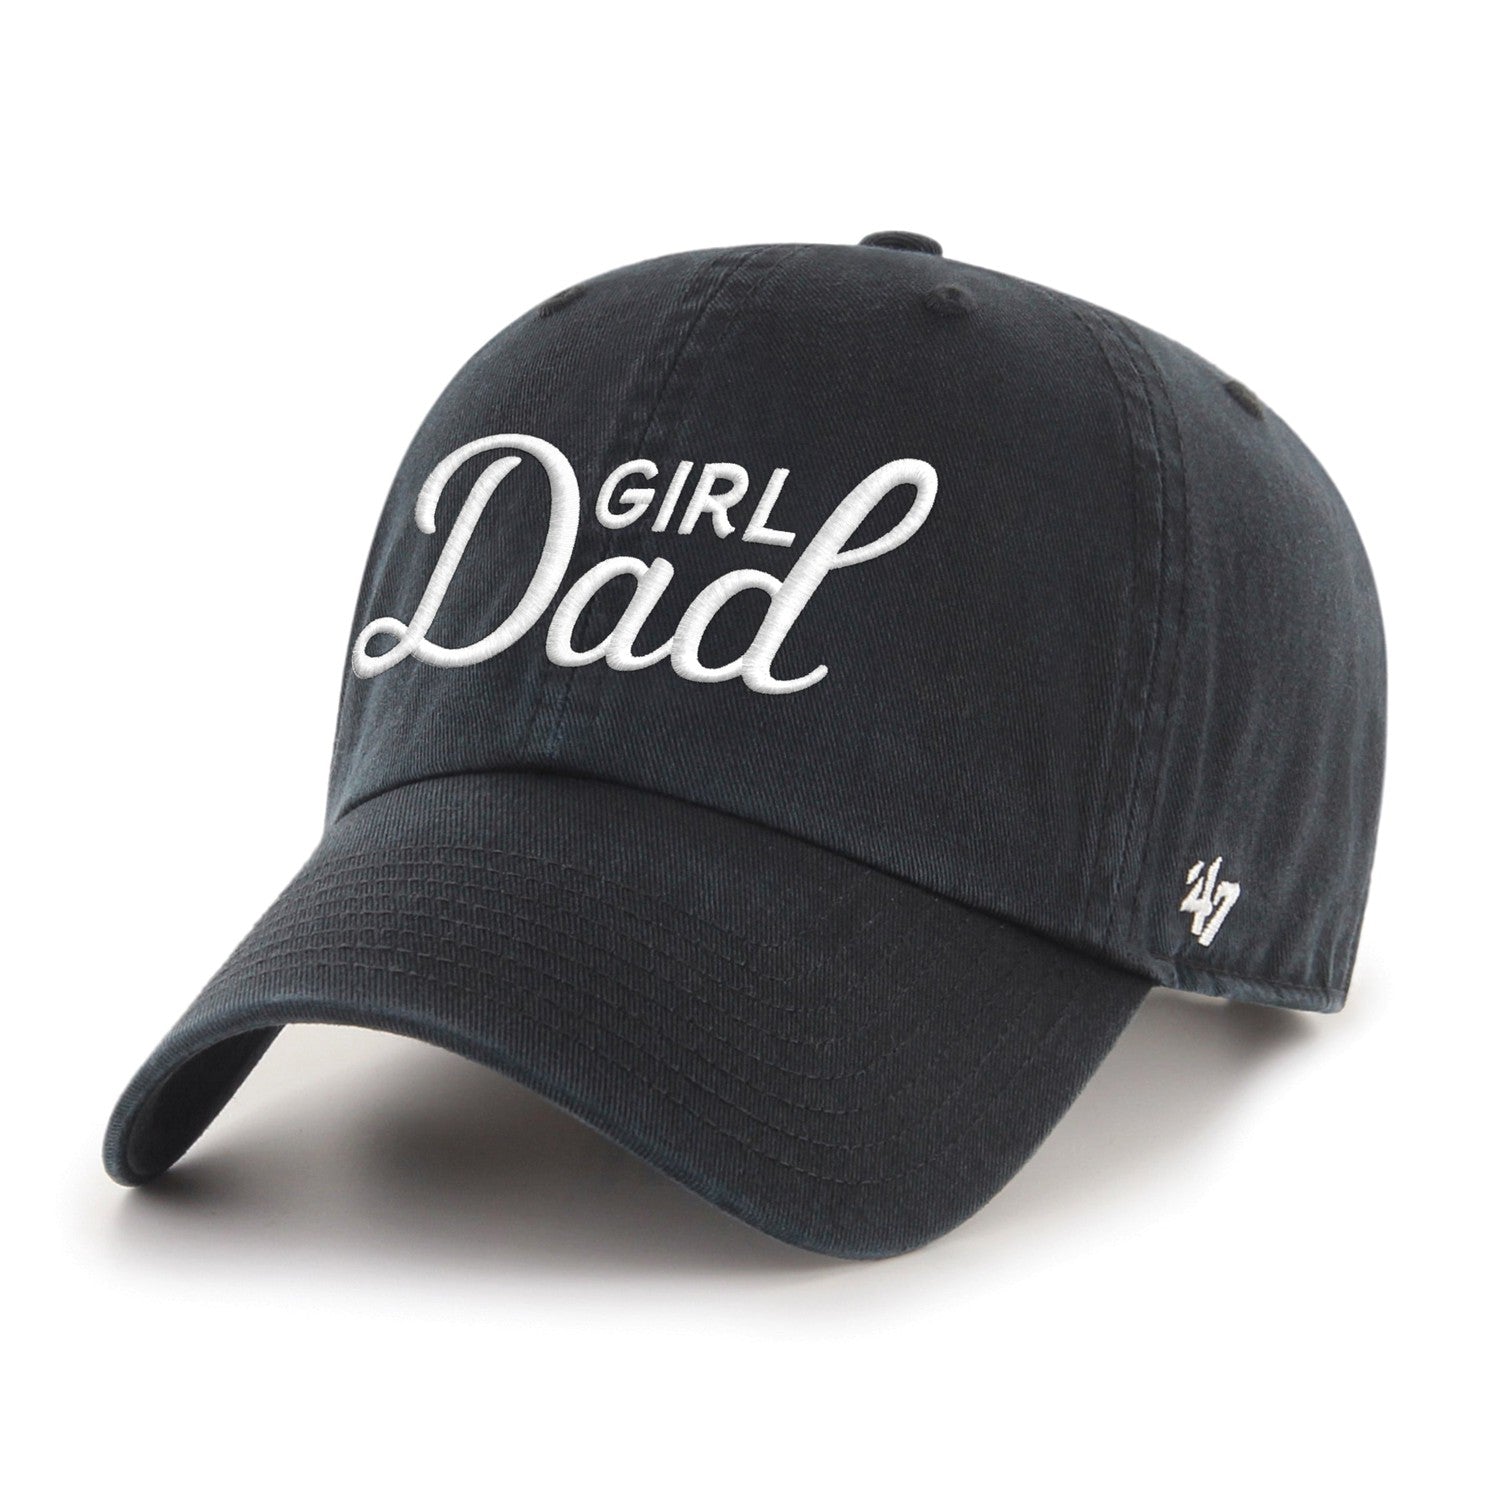 Girl Dad '47 Clean Up Hat